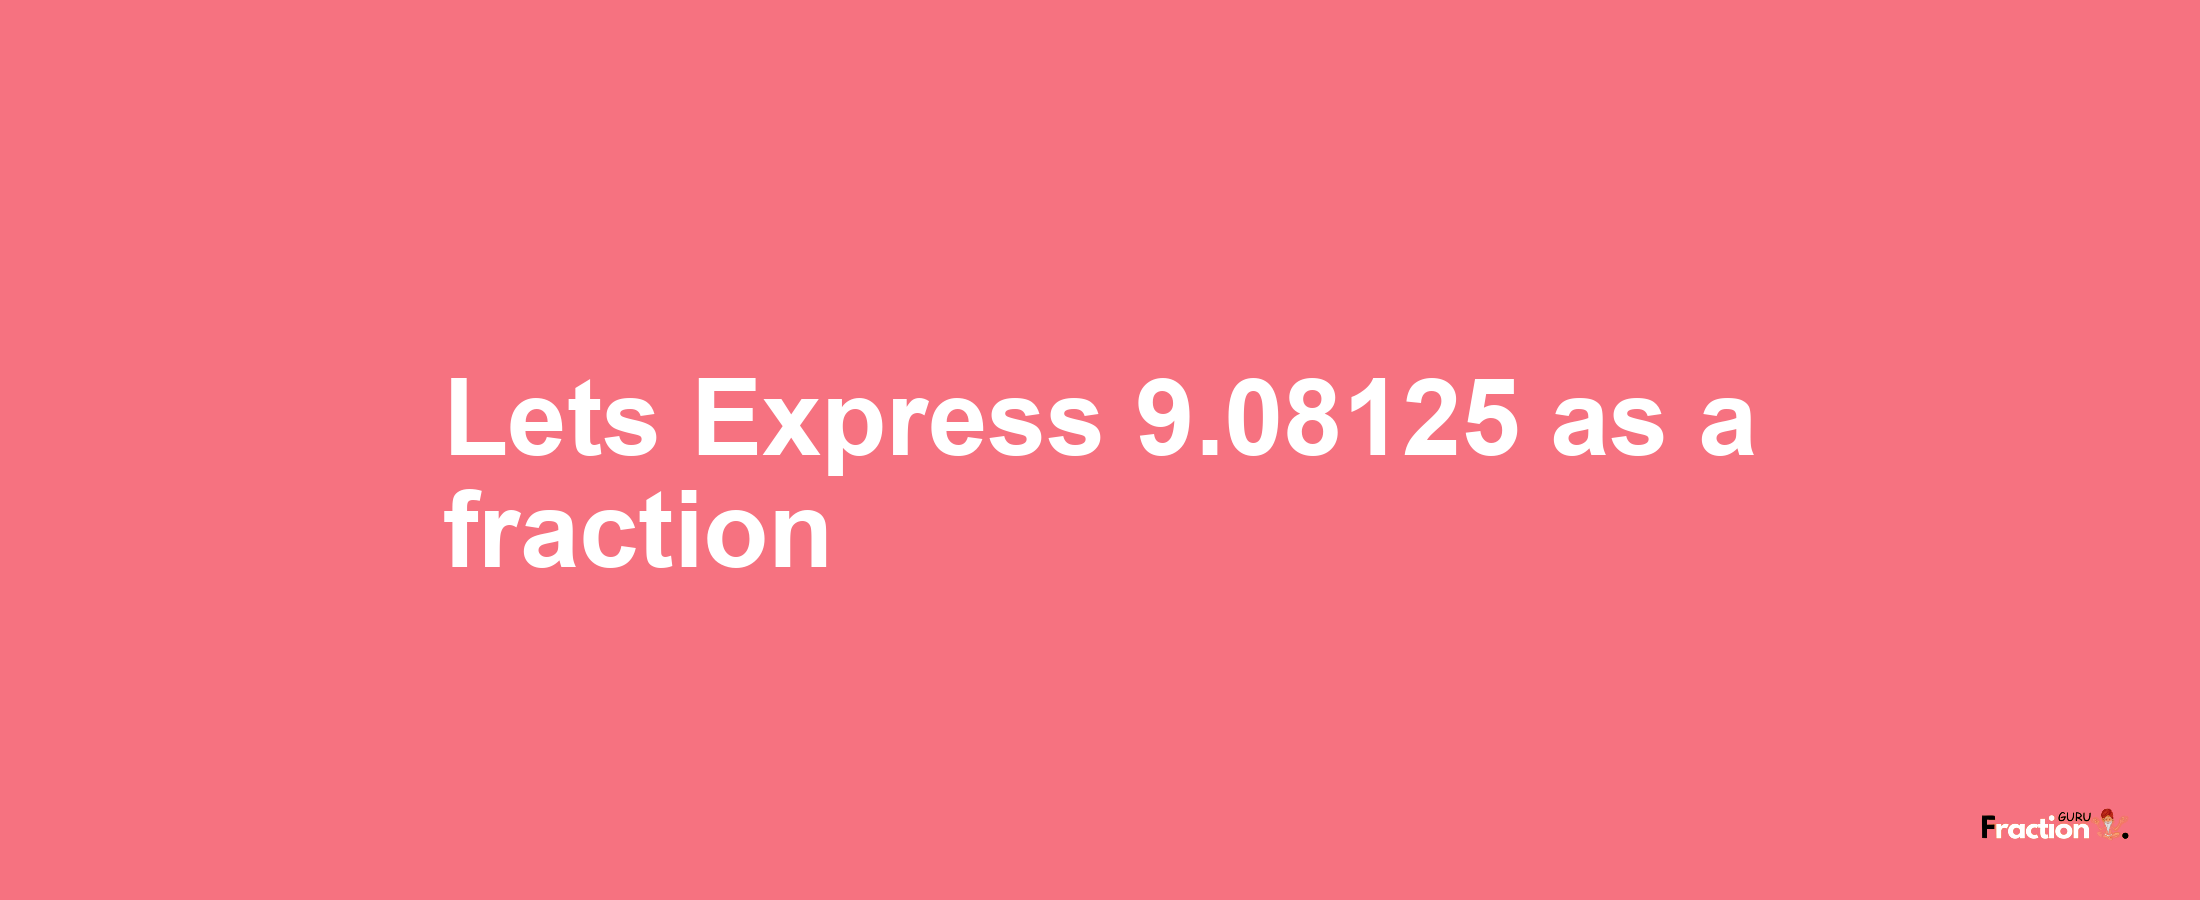 Lets Express 9.08125 as afraction